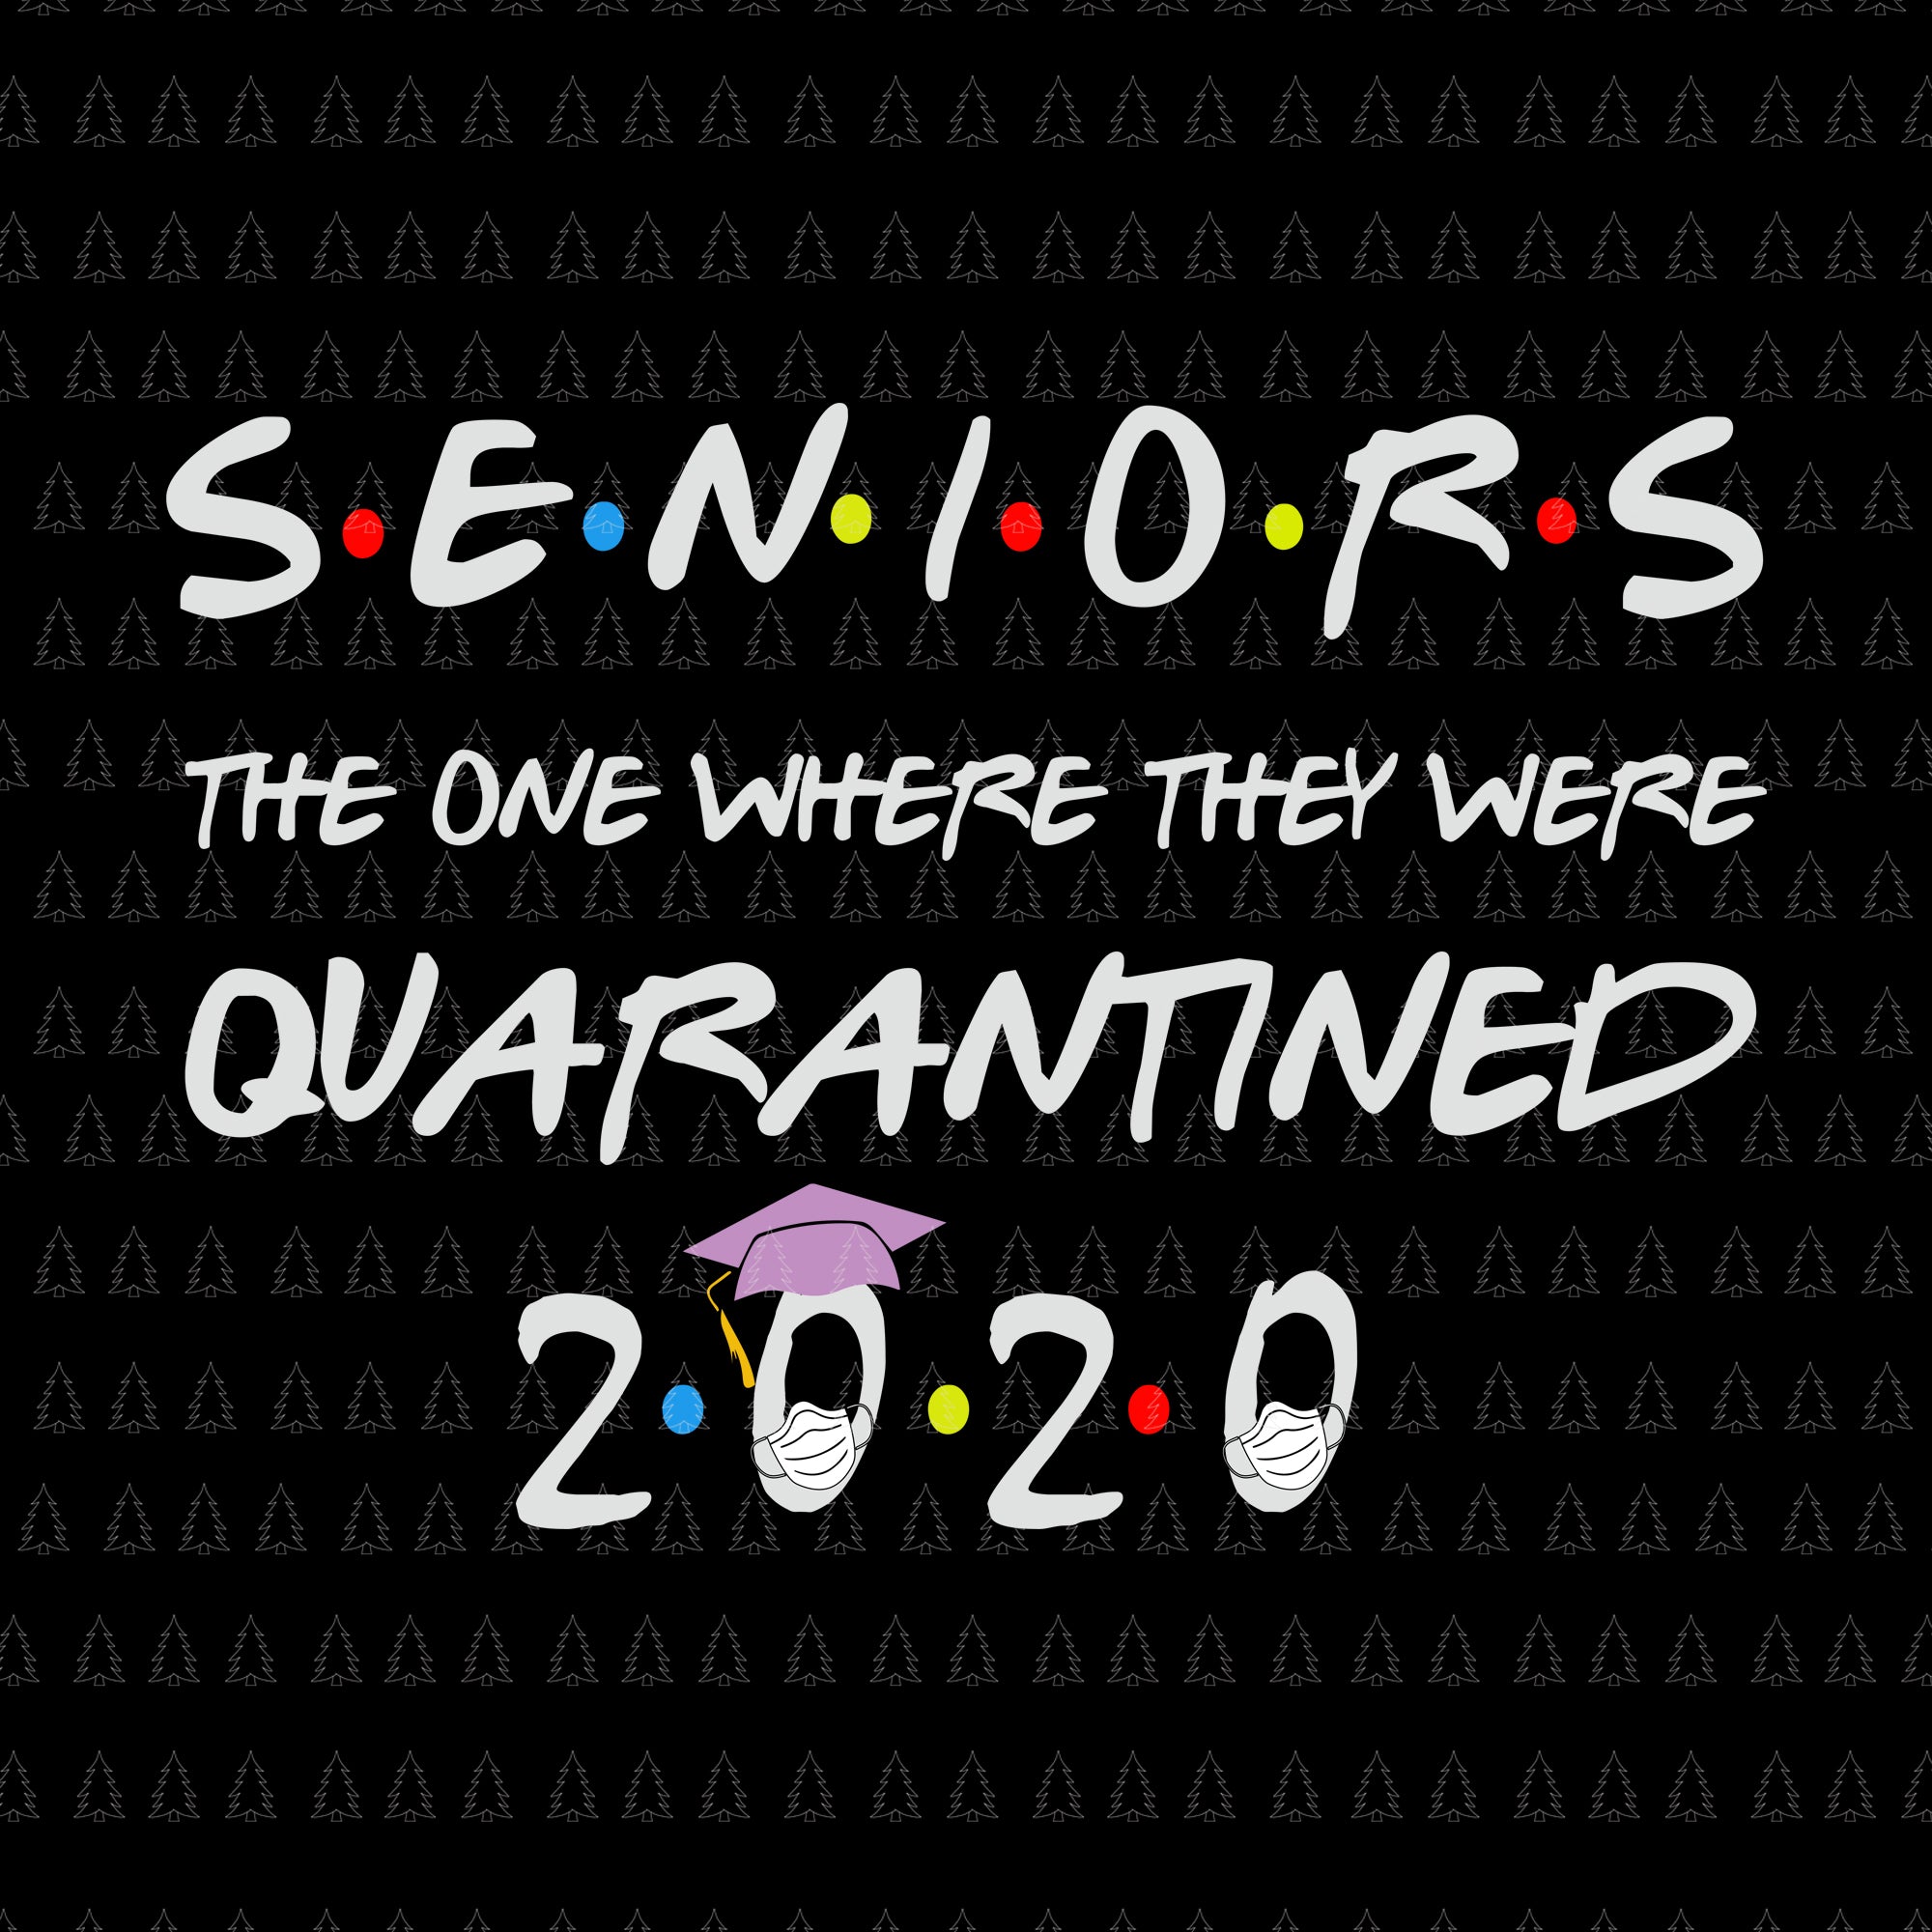 Senior the one where they were quarantined 2020 svg, senior the one where they were quarantined 2020, senior 2020 svg, senior 2020 png, eps, dxf, svg file